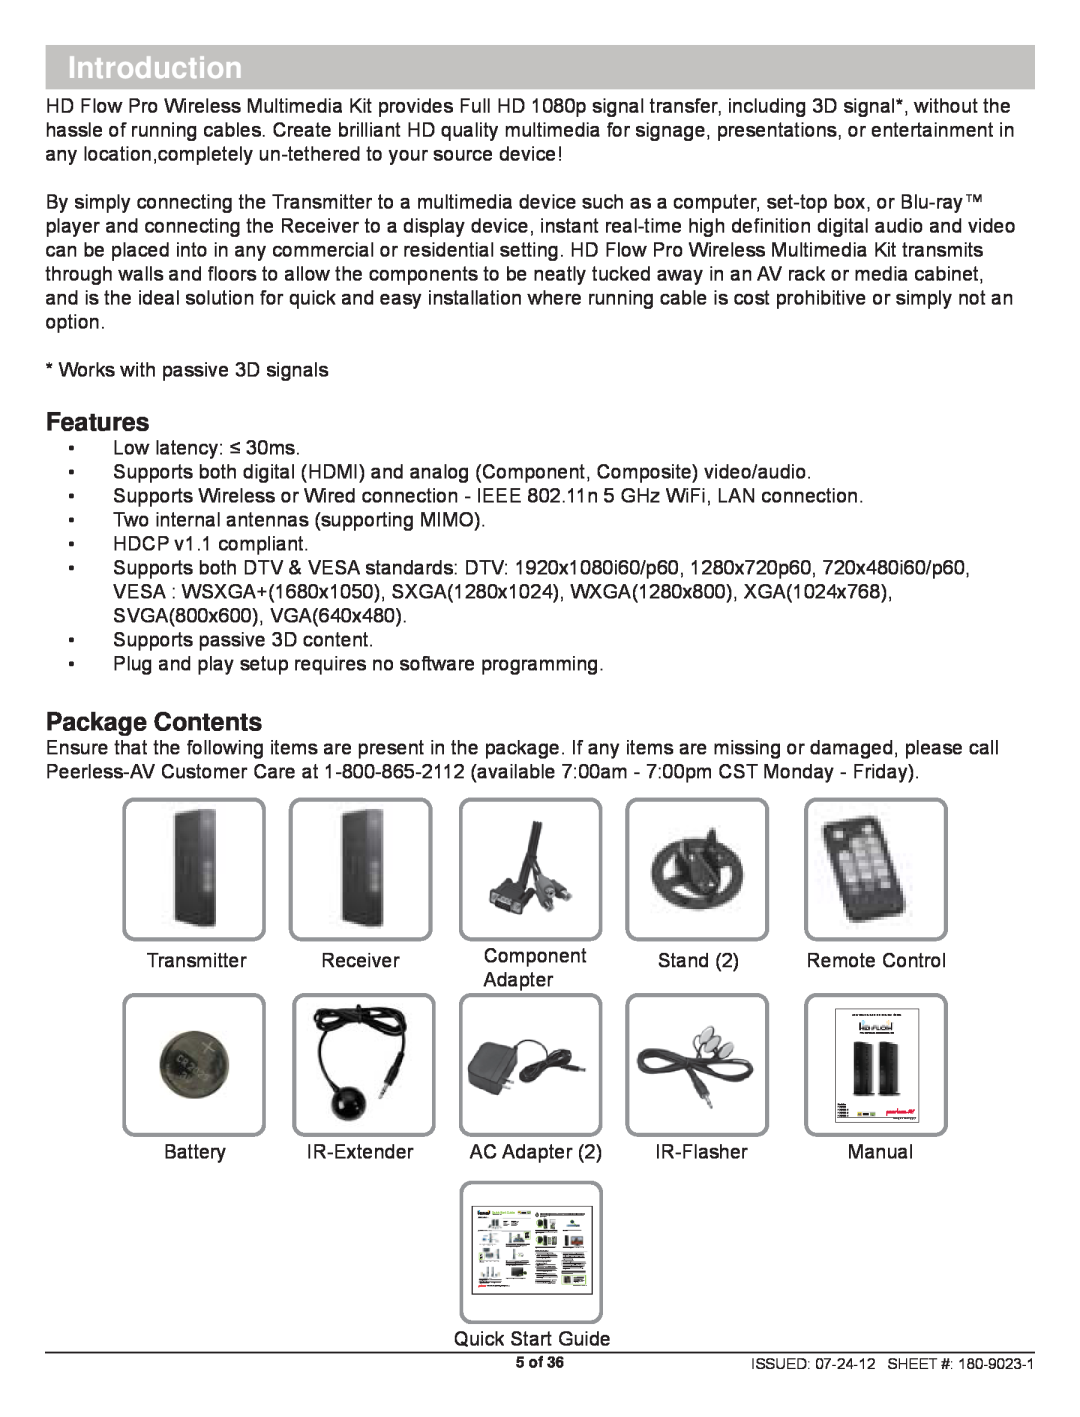 Peerless Industries HDS200 user manual Introduction, Features, Package Contents 